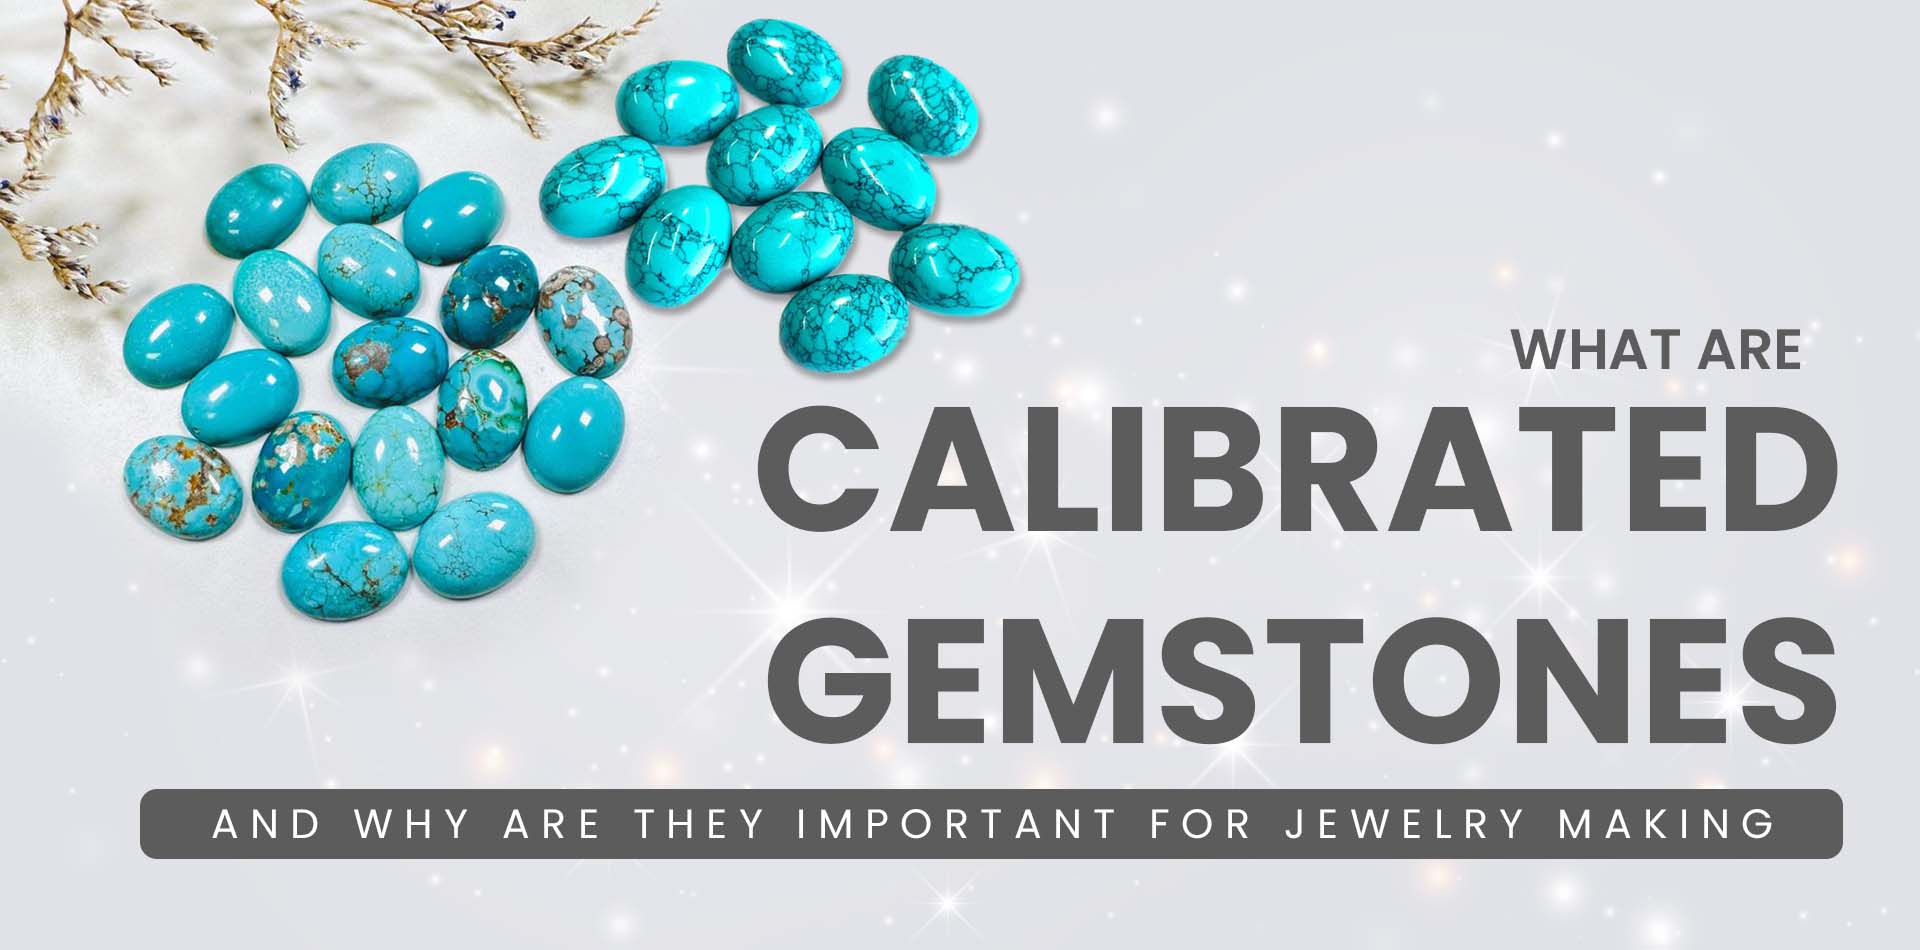 What are Calibrated Gemstones, and Why are they Important for Jewelry Making